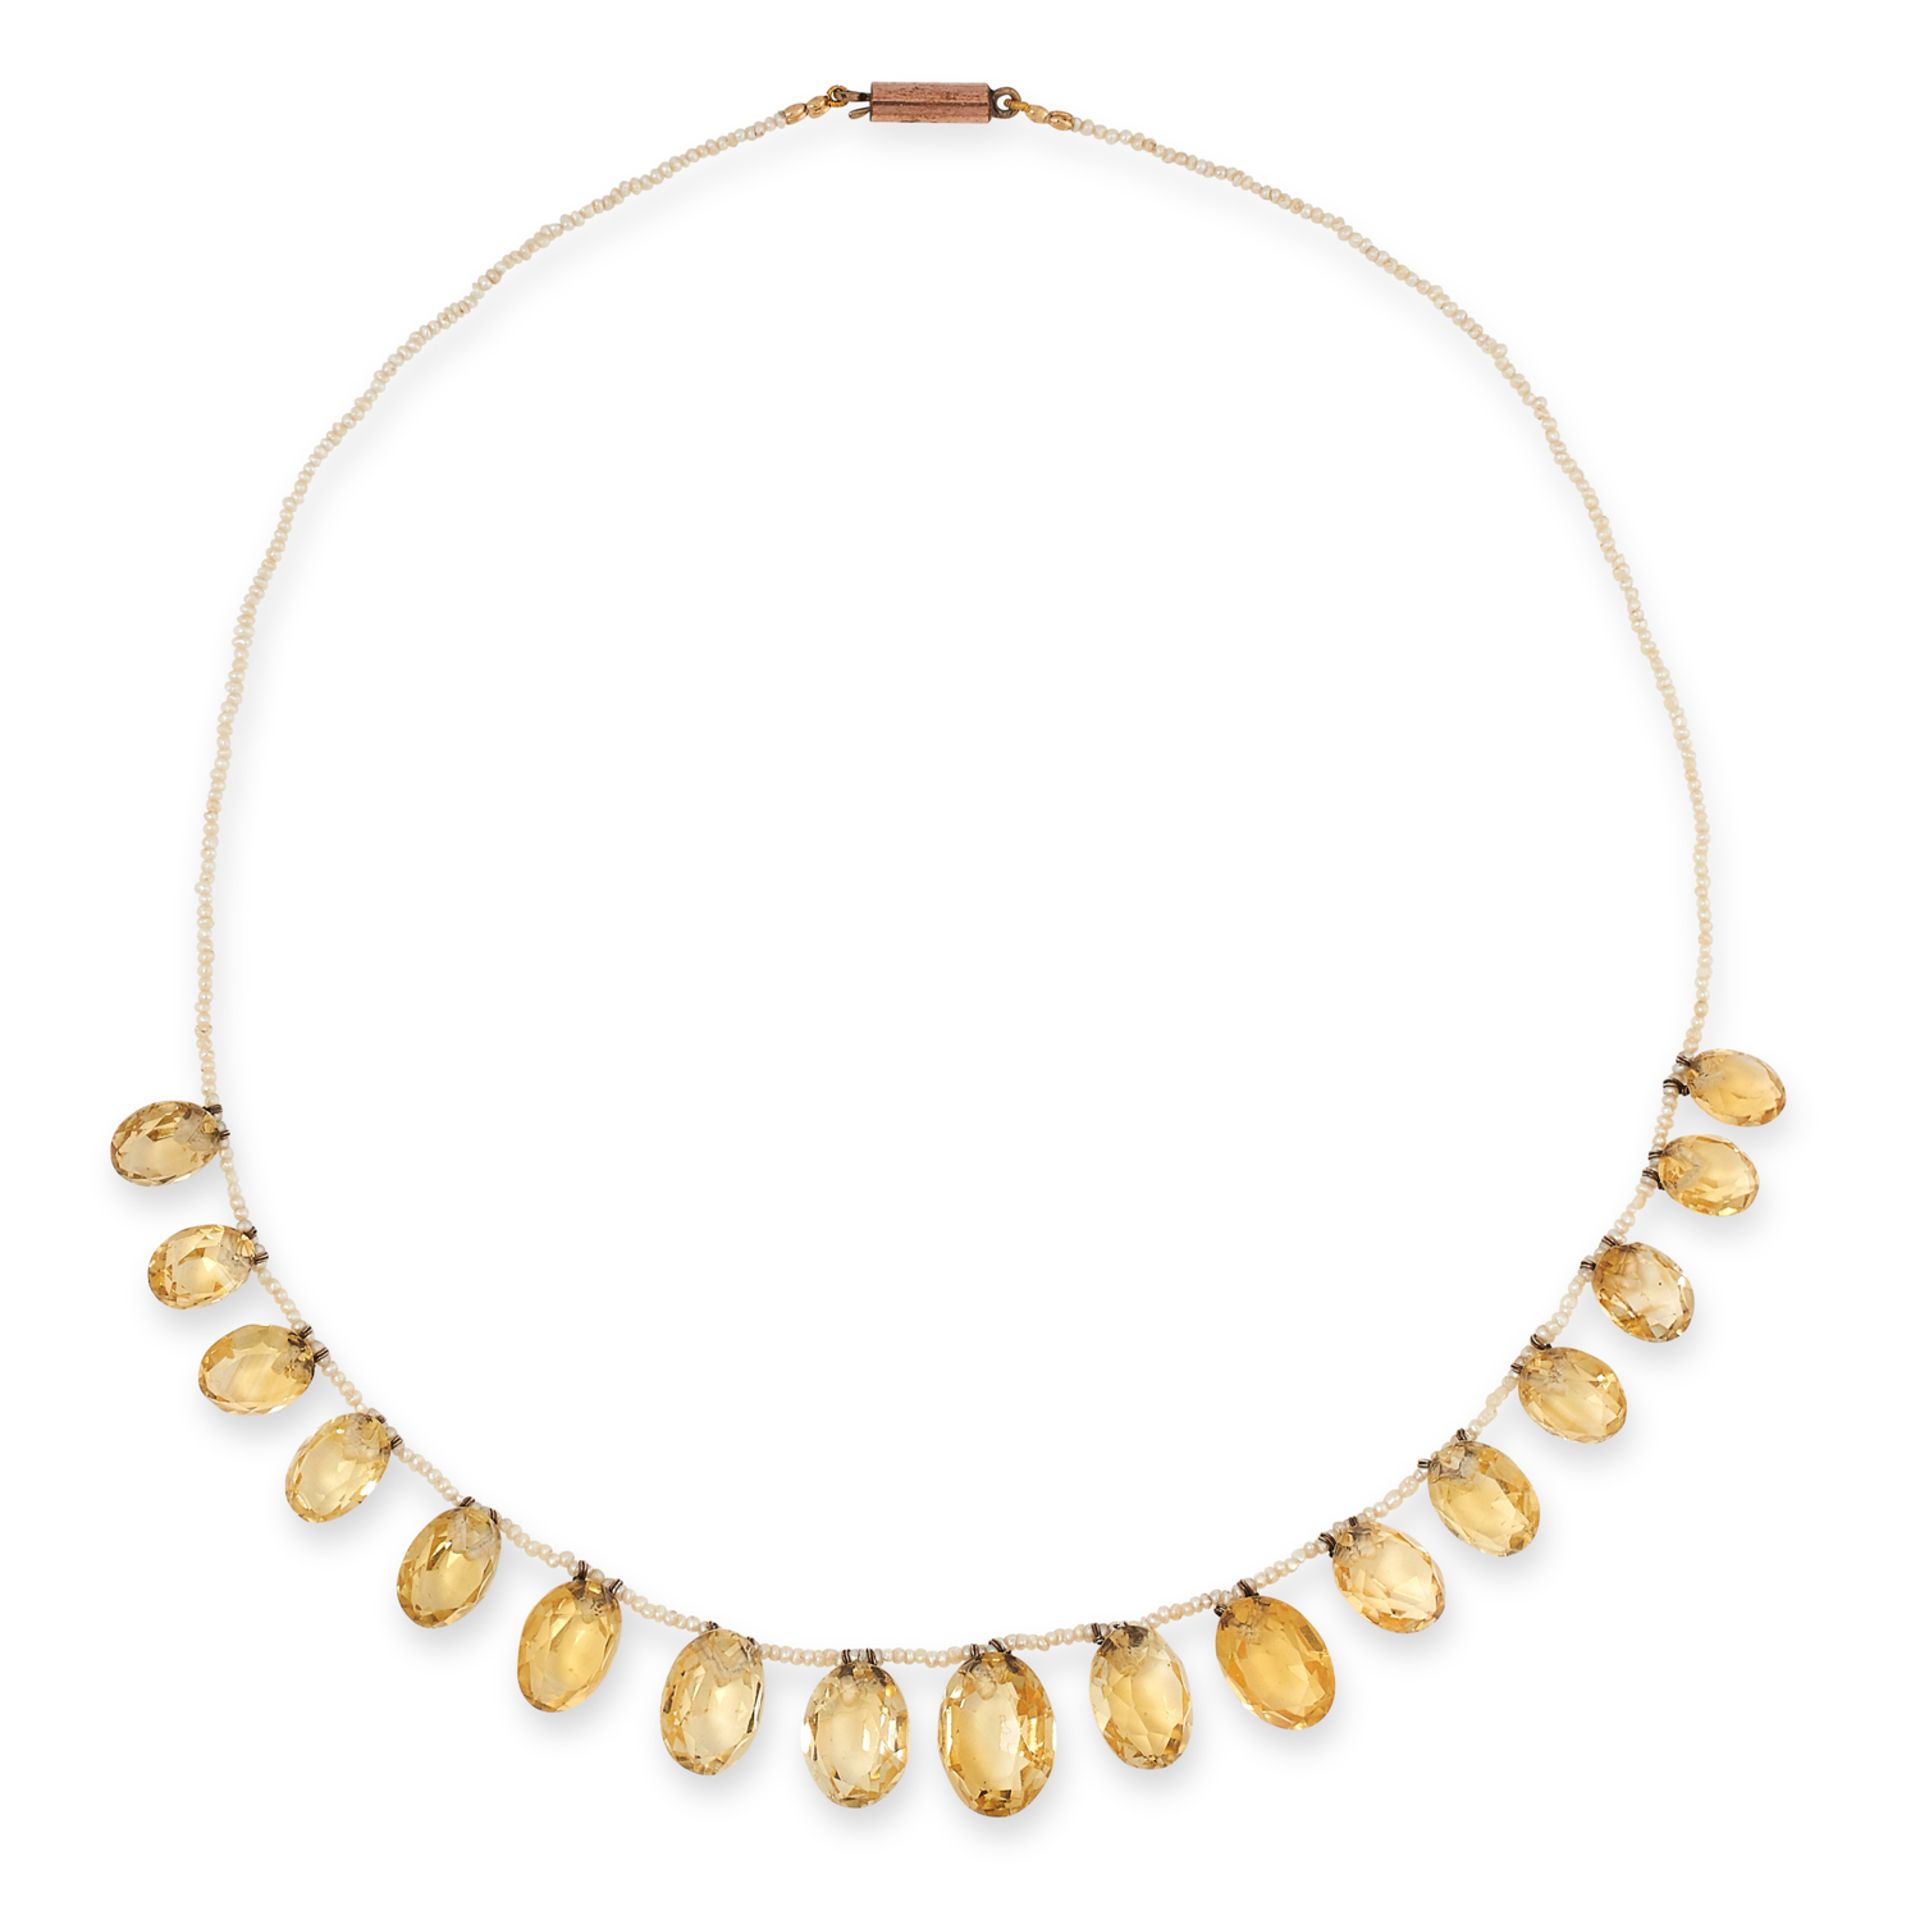 AN ANTIQUE CITRINE AND PEARL NECKLACE, 19TH CENTURY comprising of a single row of seed pearls